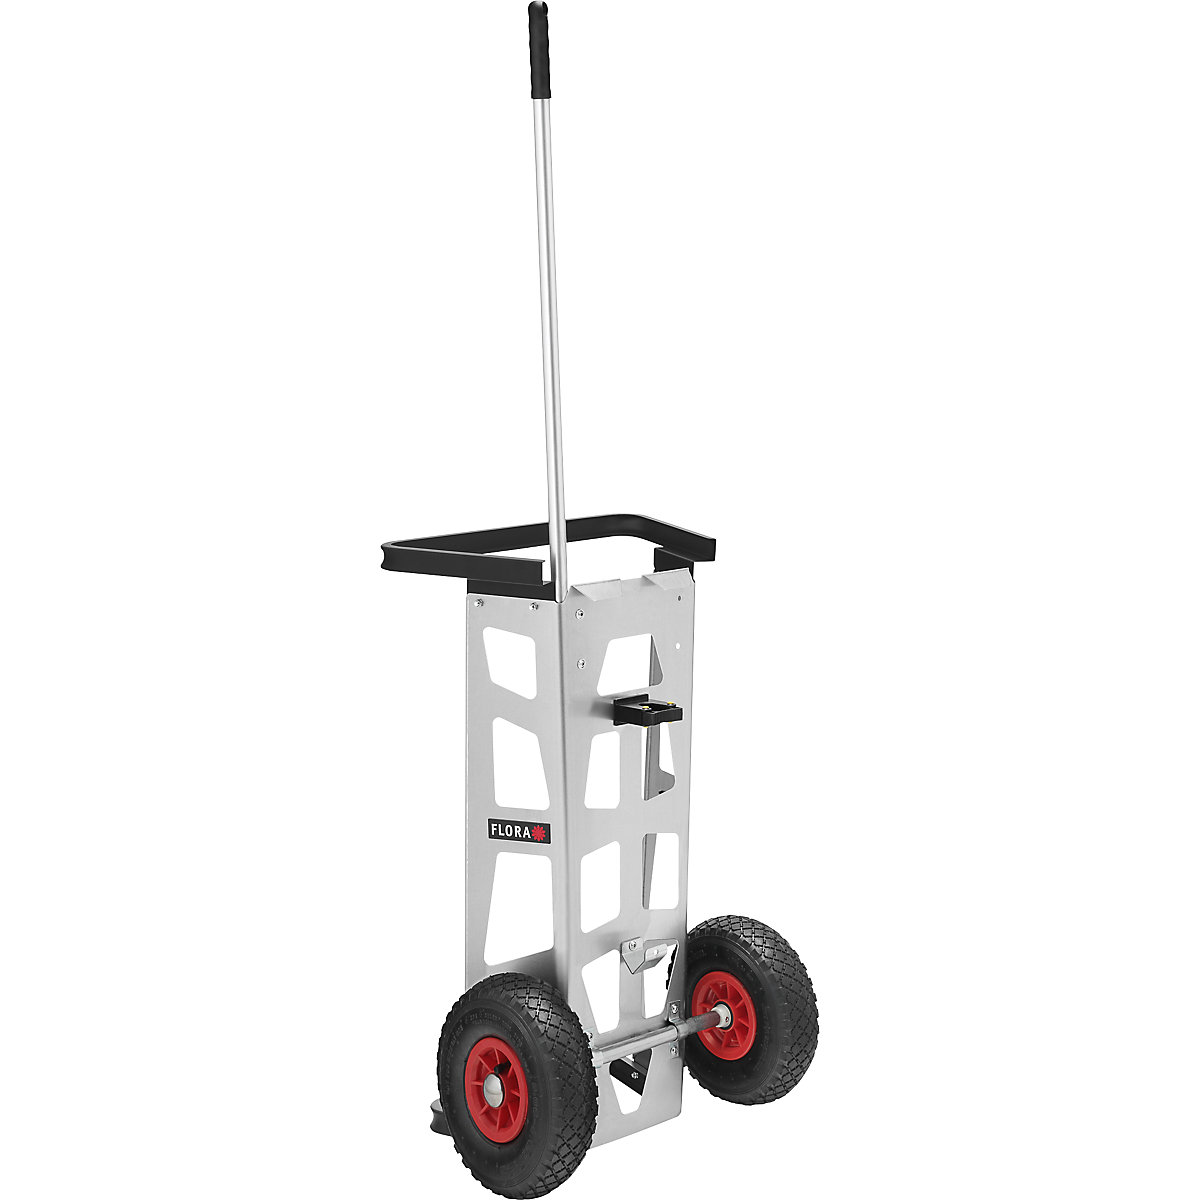 EASY waste collection trolley – FLORA